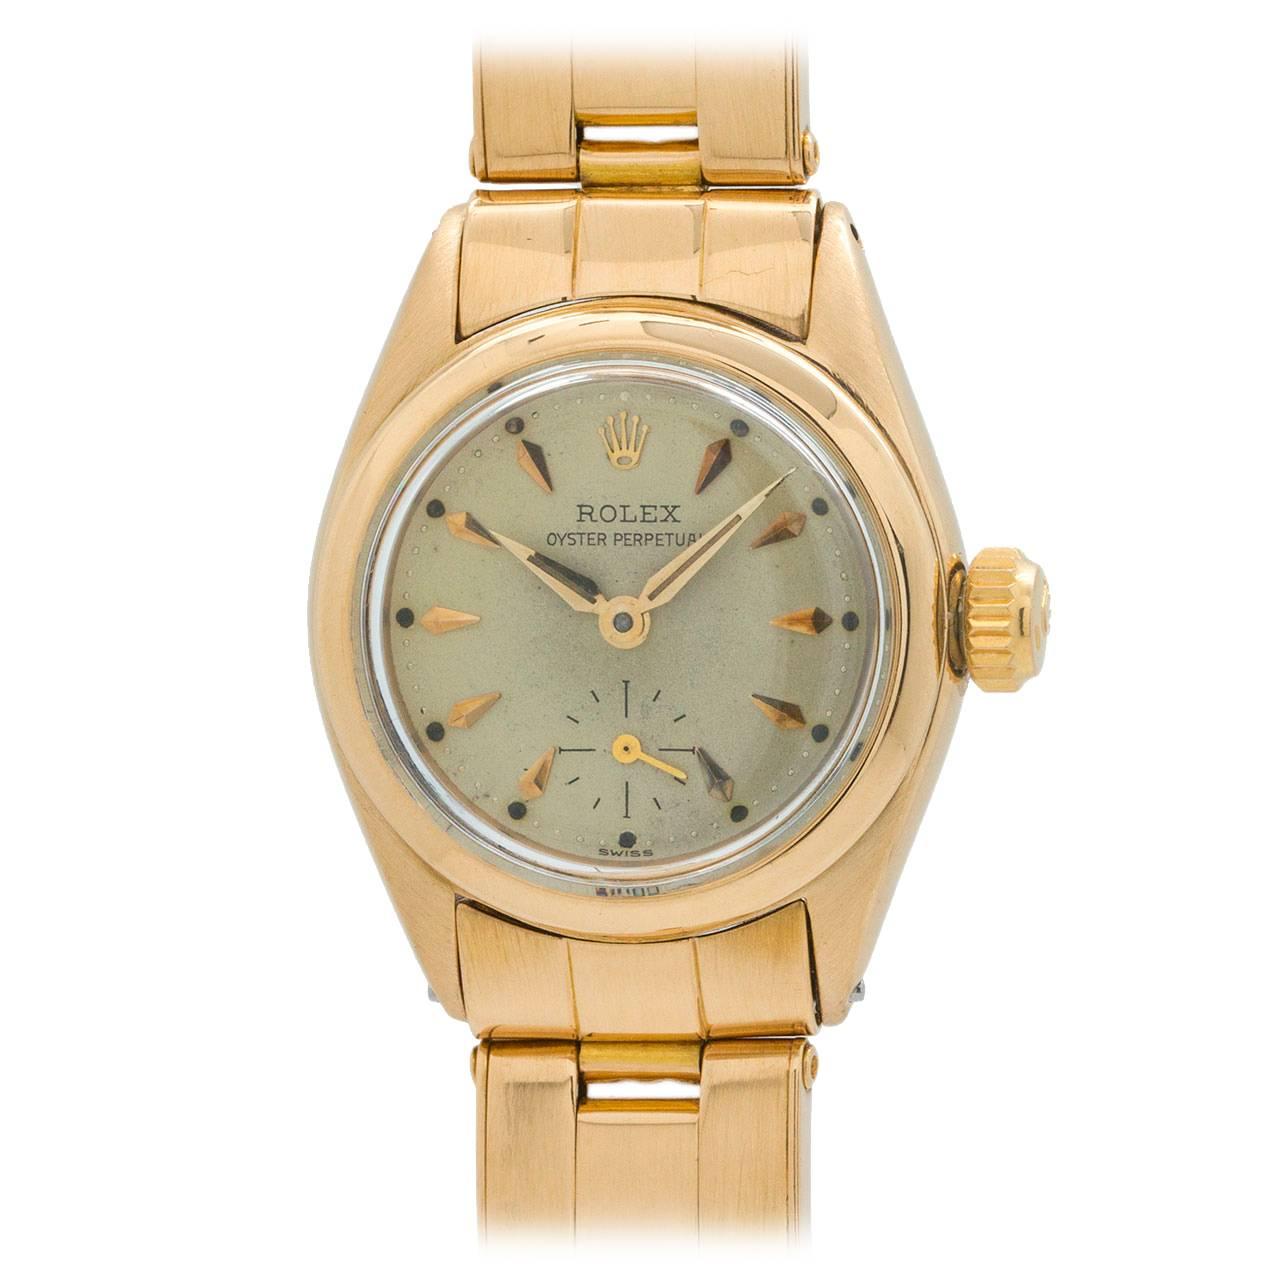 Rolex Lady's Yellow Gold Oyster Perpetual Wristwatch Ref 6502